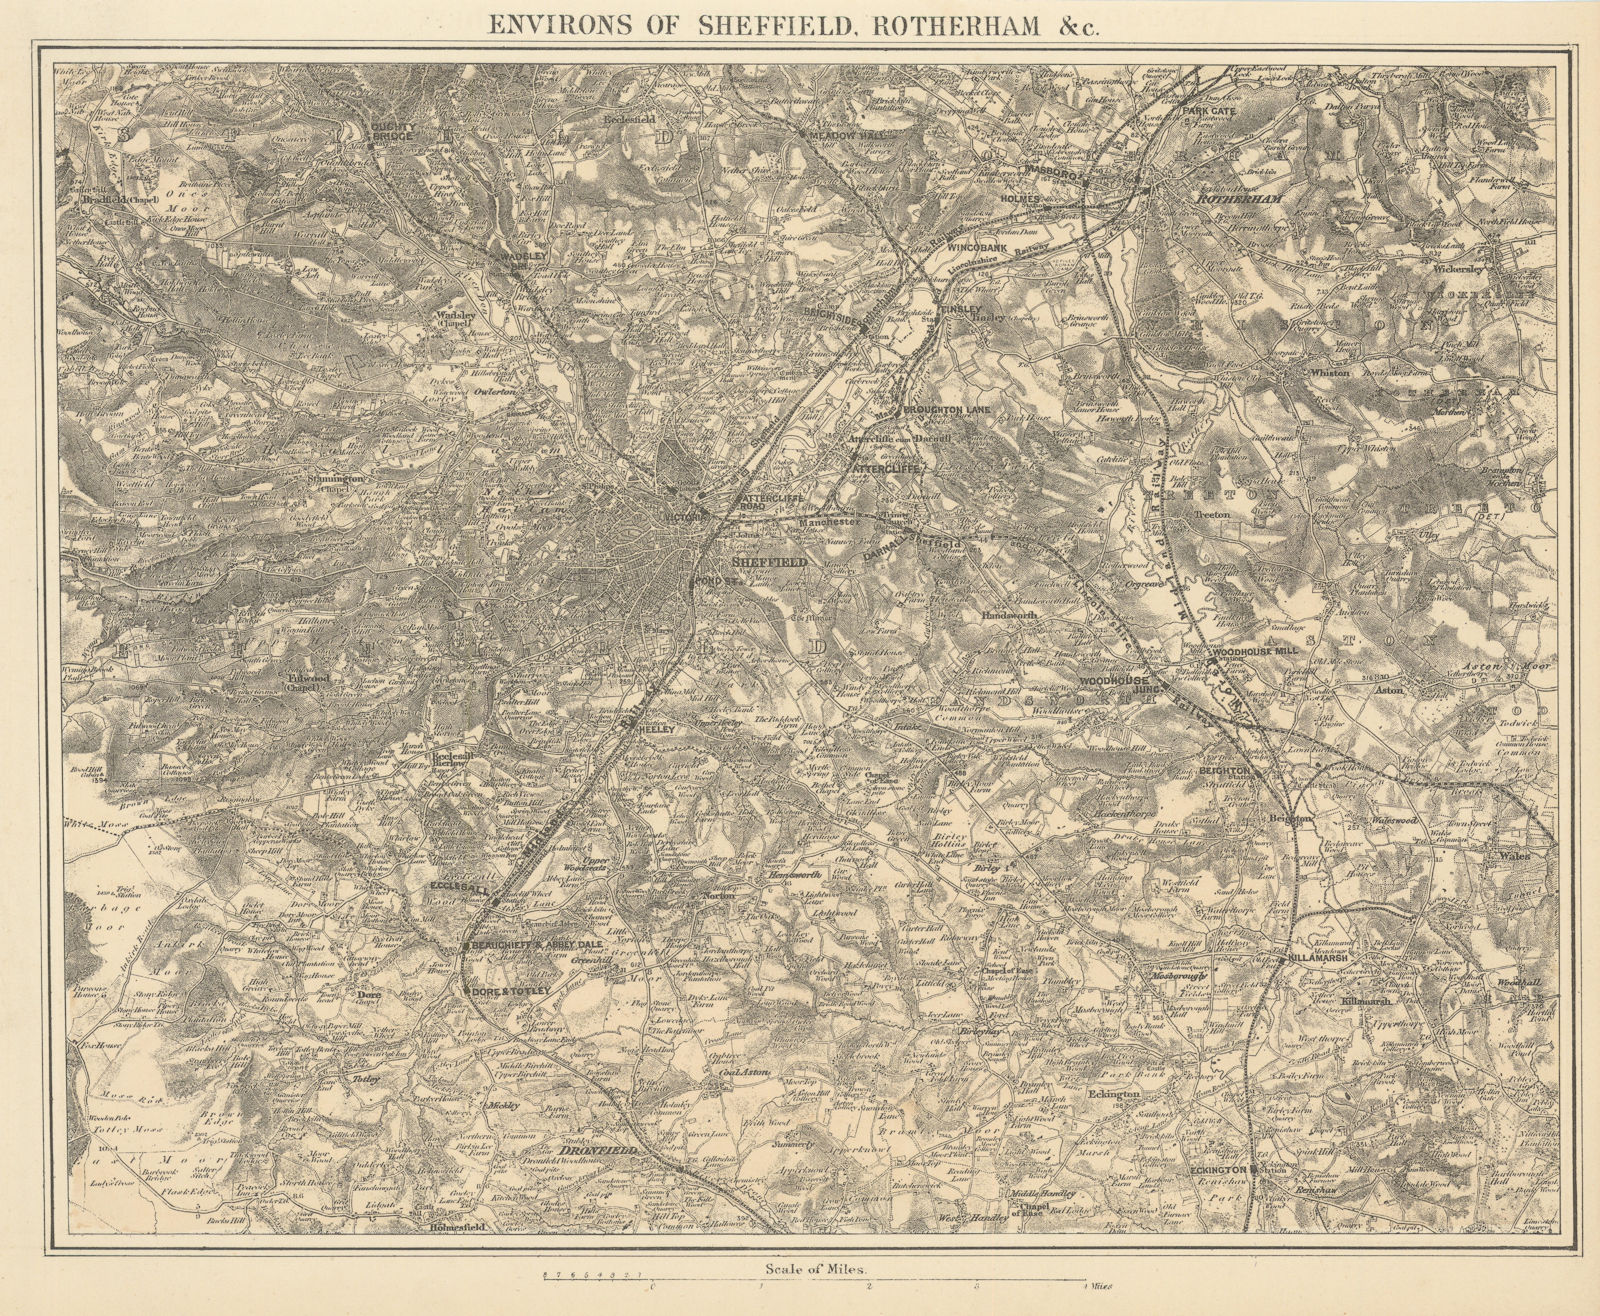 SHEFFIELD, ROTHERHAM & environs. East Peak District. GW BACON 1883 old map